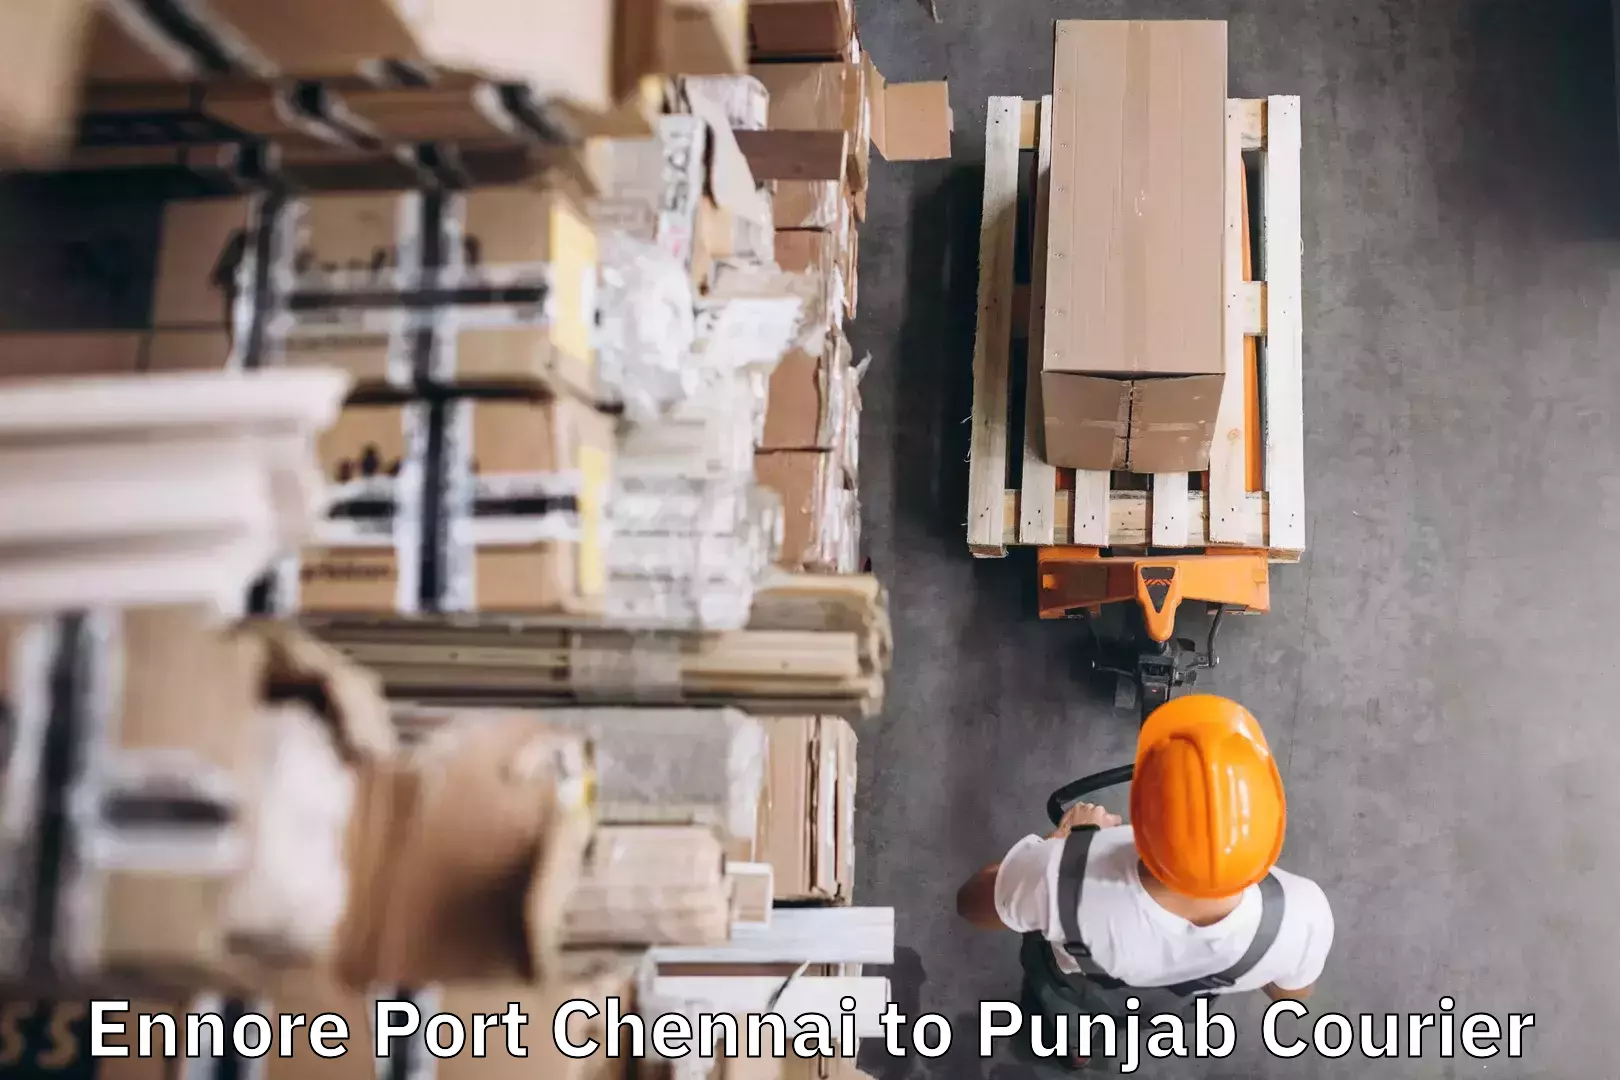 Luggage shipment tracking in Ennore Port Chennai to Mohali